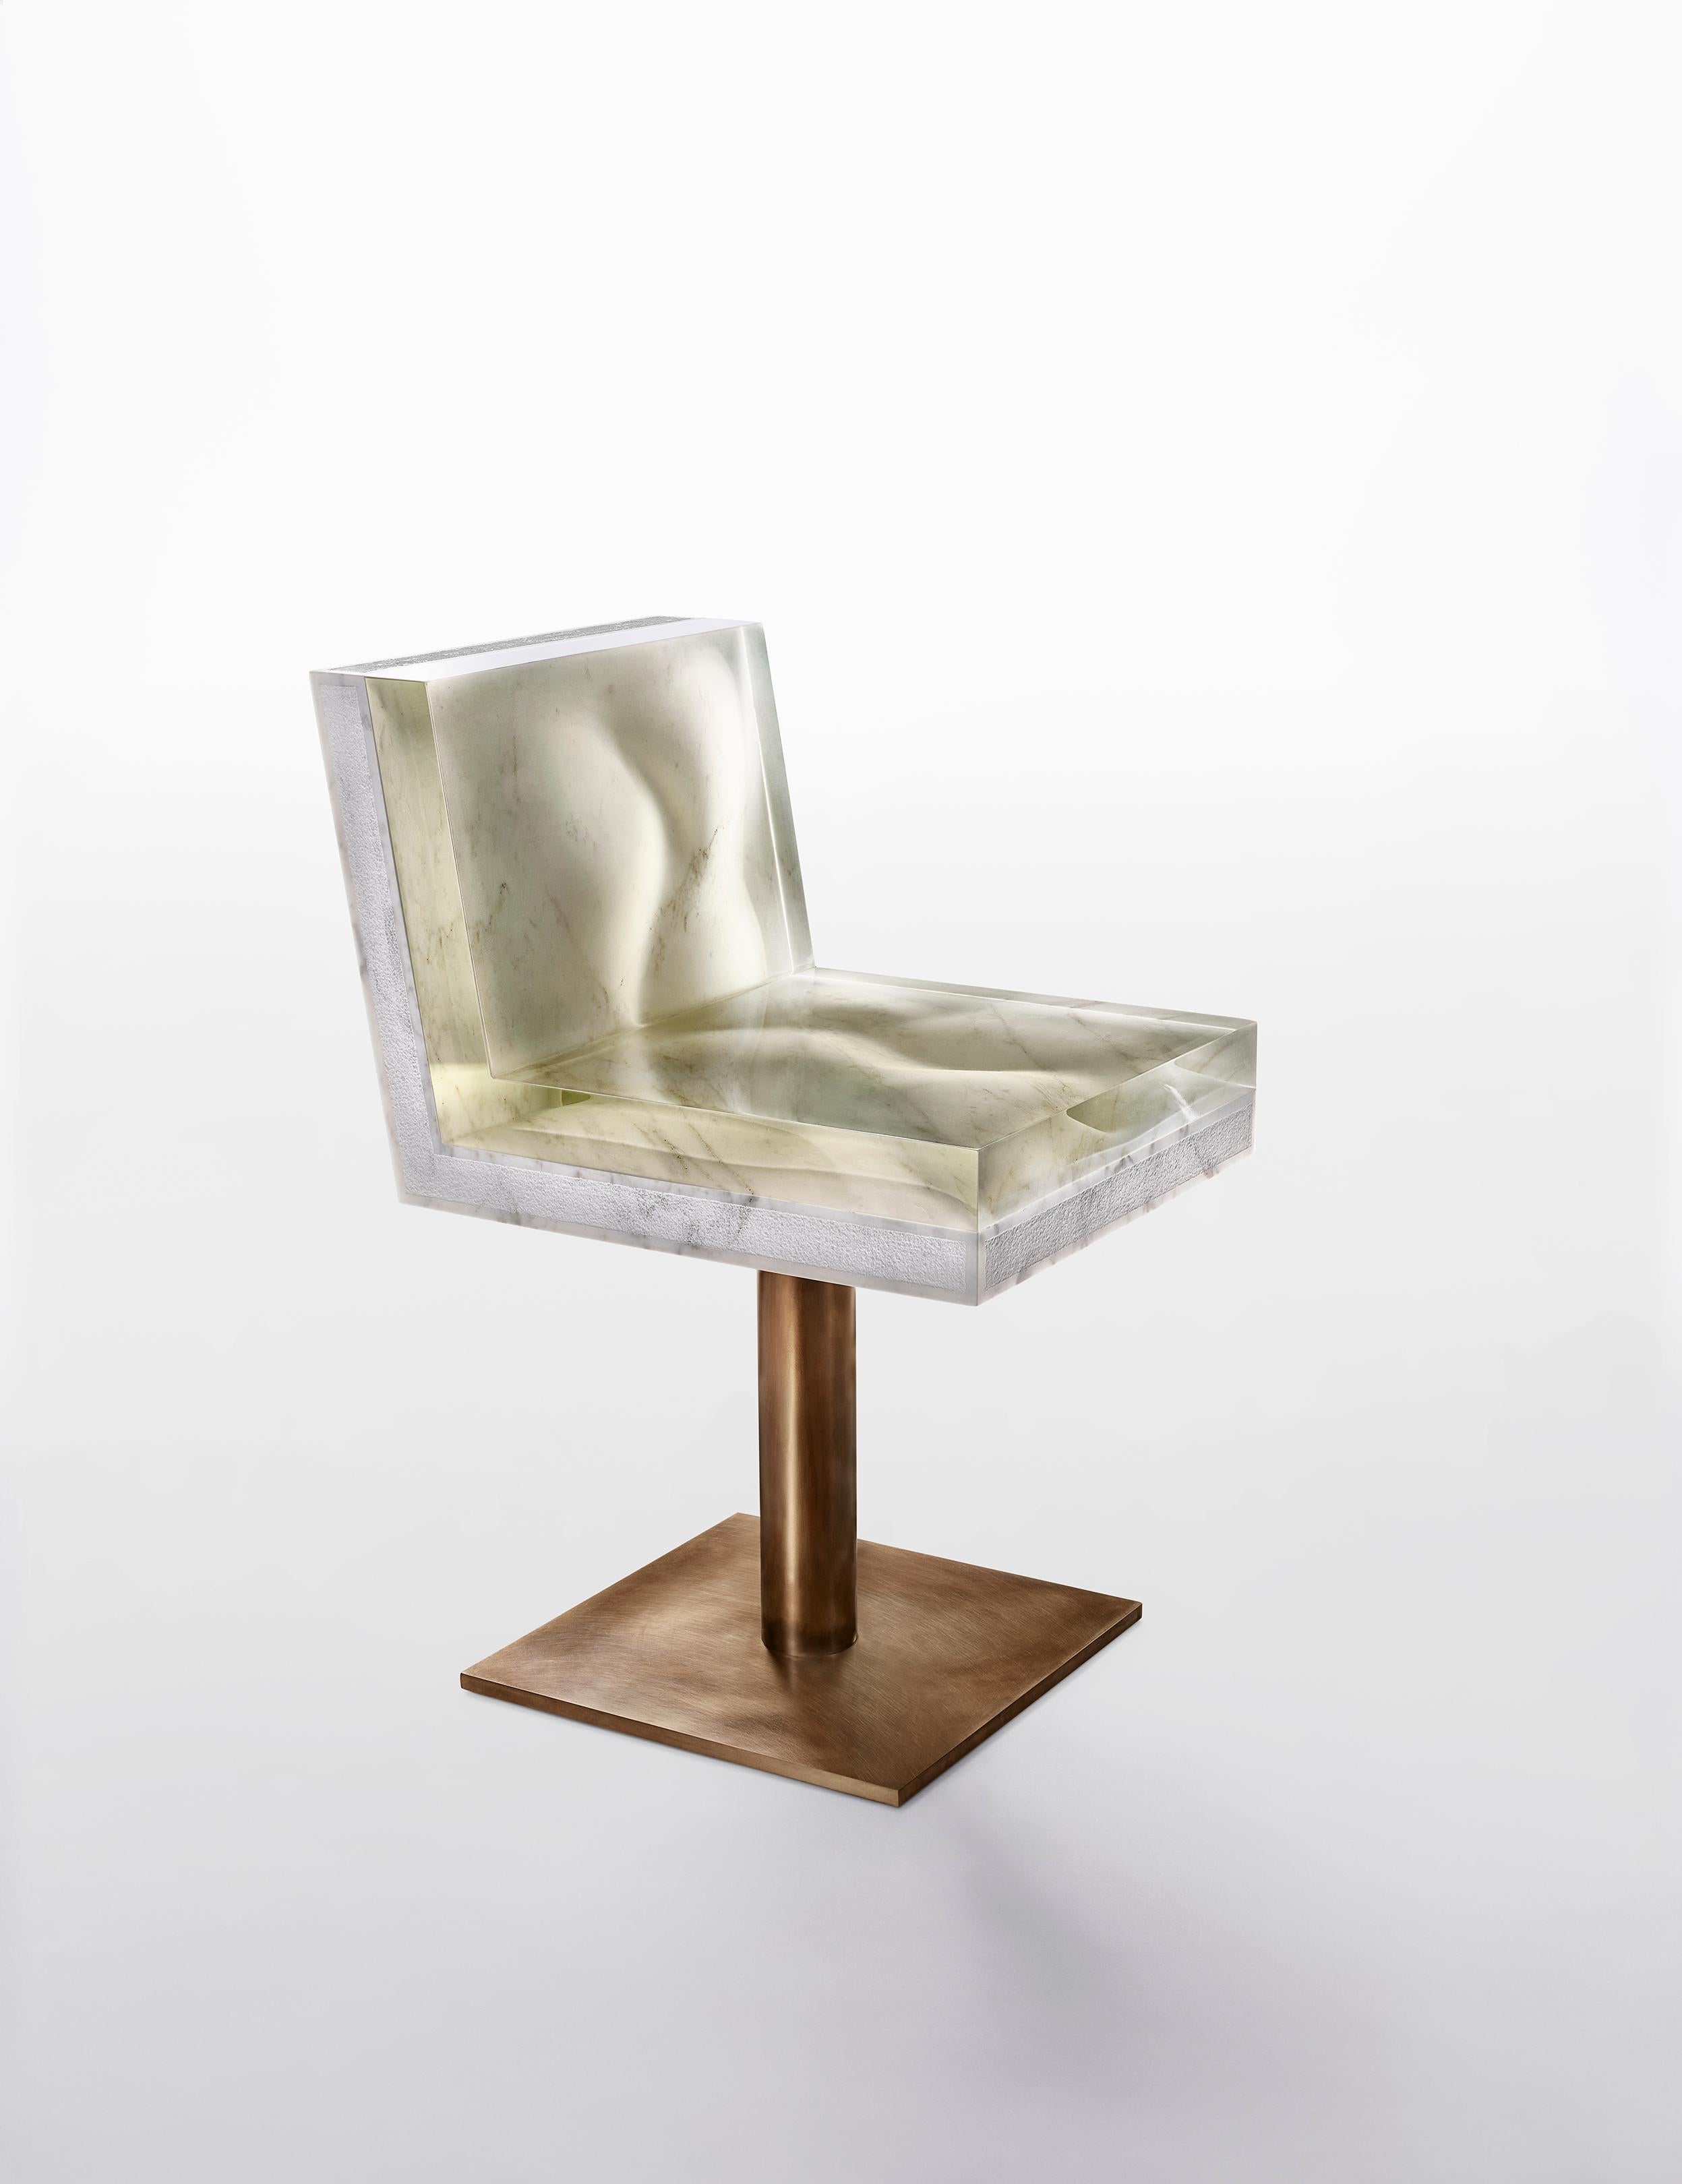 Marble low table by Jonathan Hansen
12 Editions + 1 AP
Dimensions: 40.6 x 50.8 x 71 cm
Materials: Calacatta marble, architectural bronze, resin


SERIES I CAPTUM BIOMORFE is a group of nine sculpture works created by New York artist Jonathan